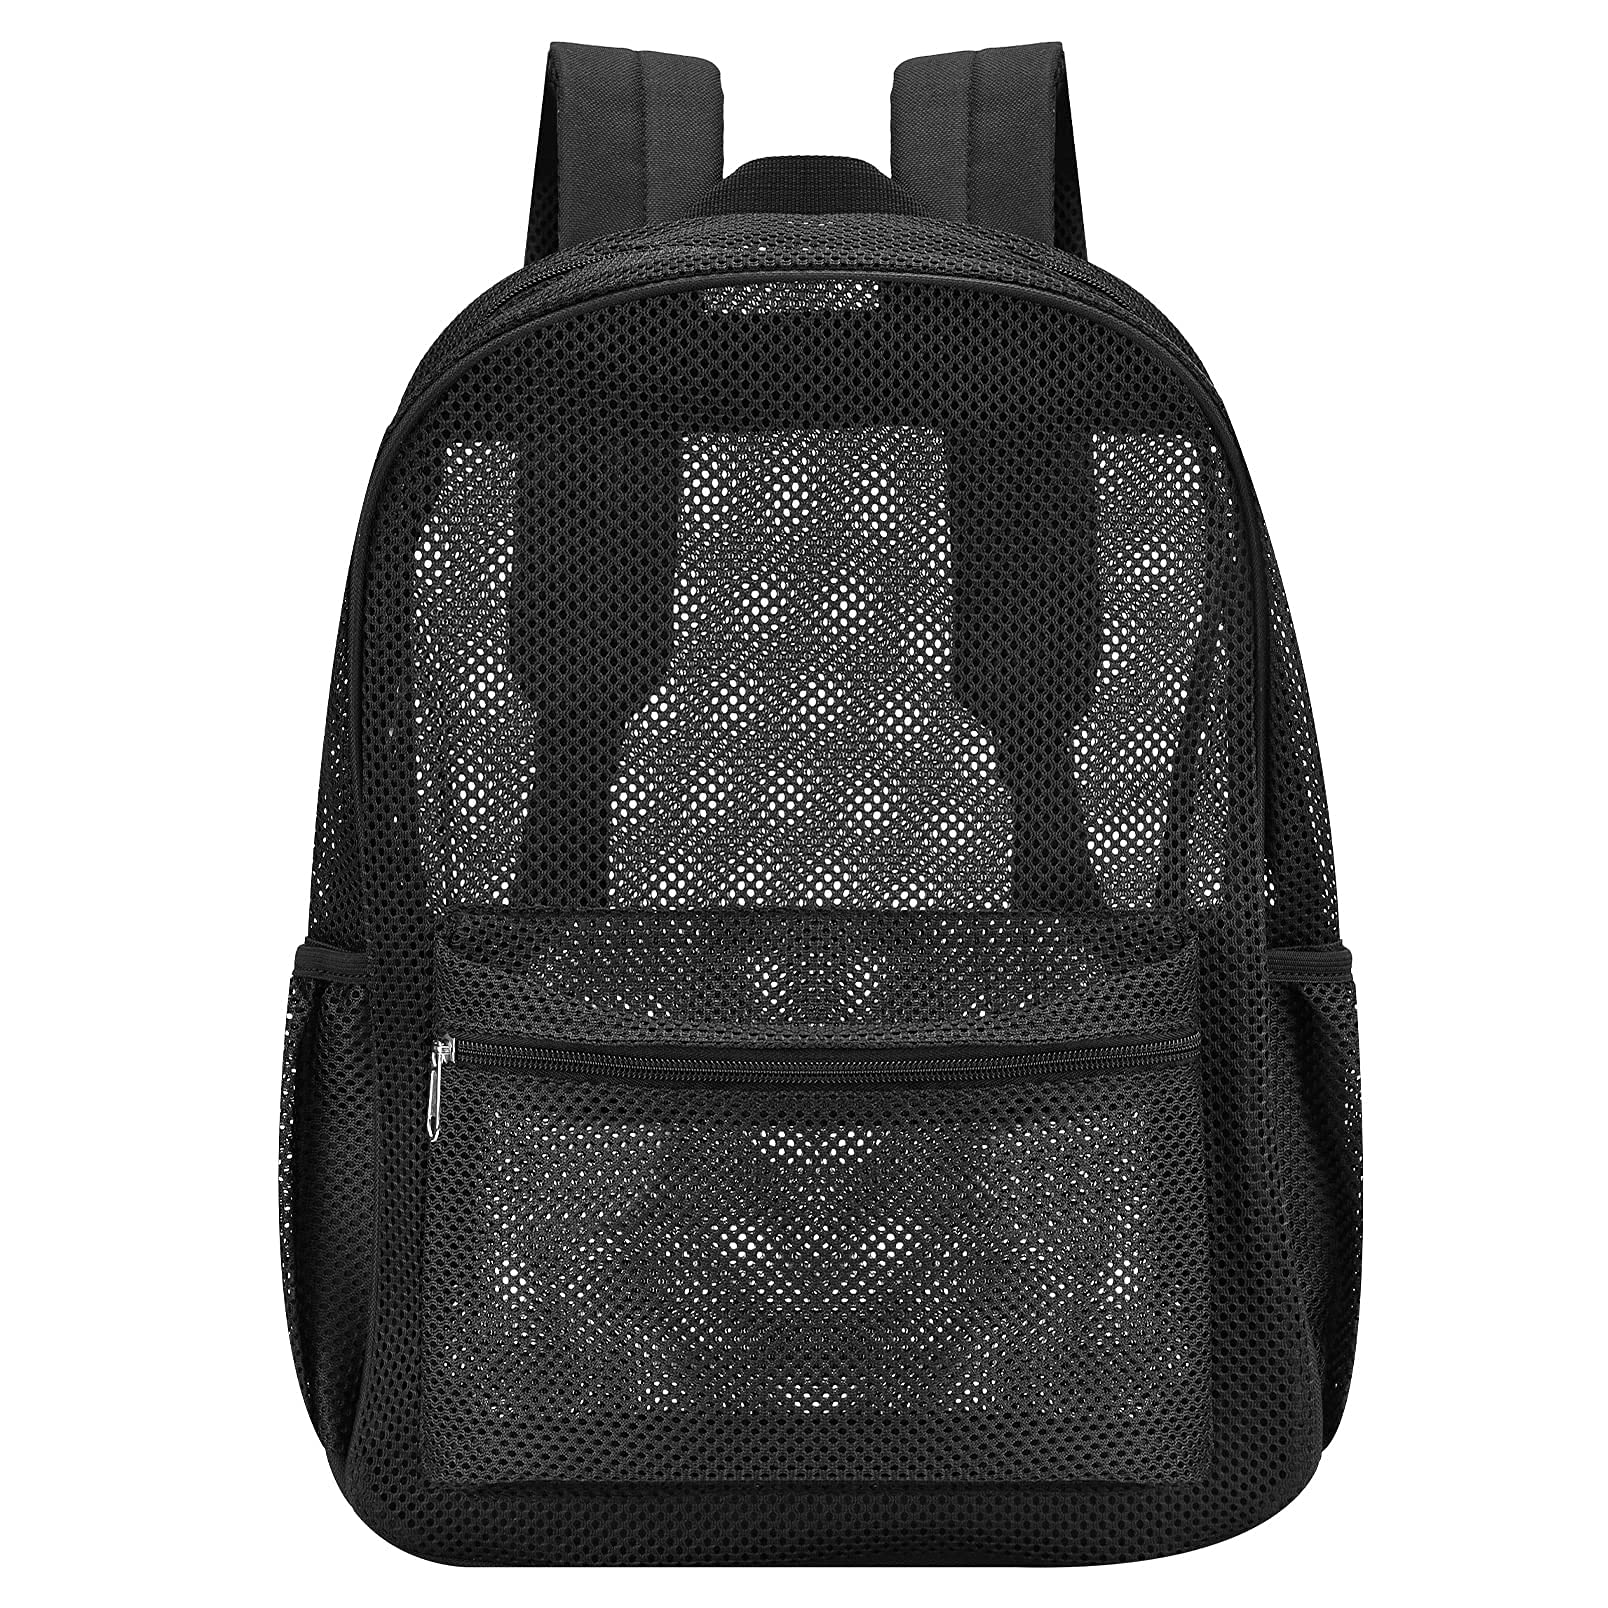 USPECLARE Heavy Duty Semi-Transparent Mesh Backpack, See Through College Student Backpack, Mesh Bookbag for Beach, Camping, Spor